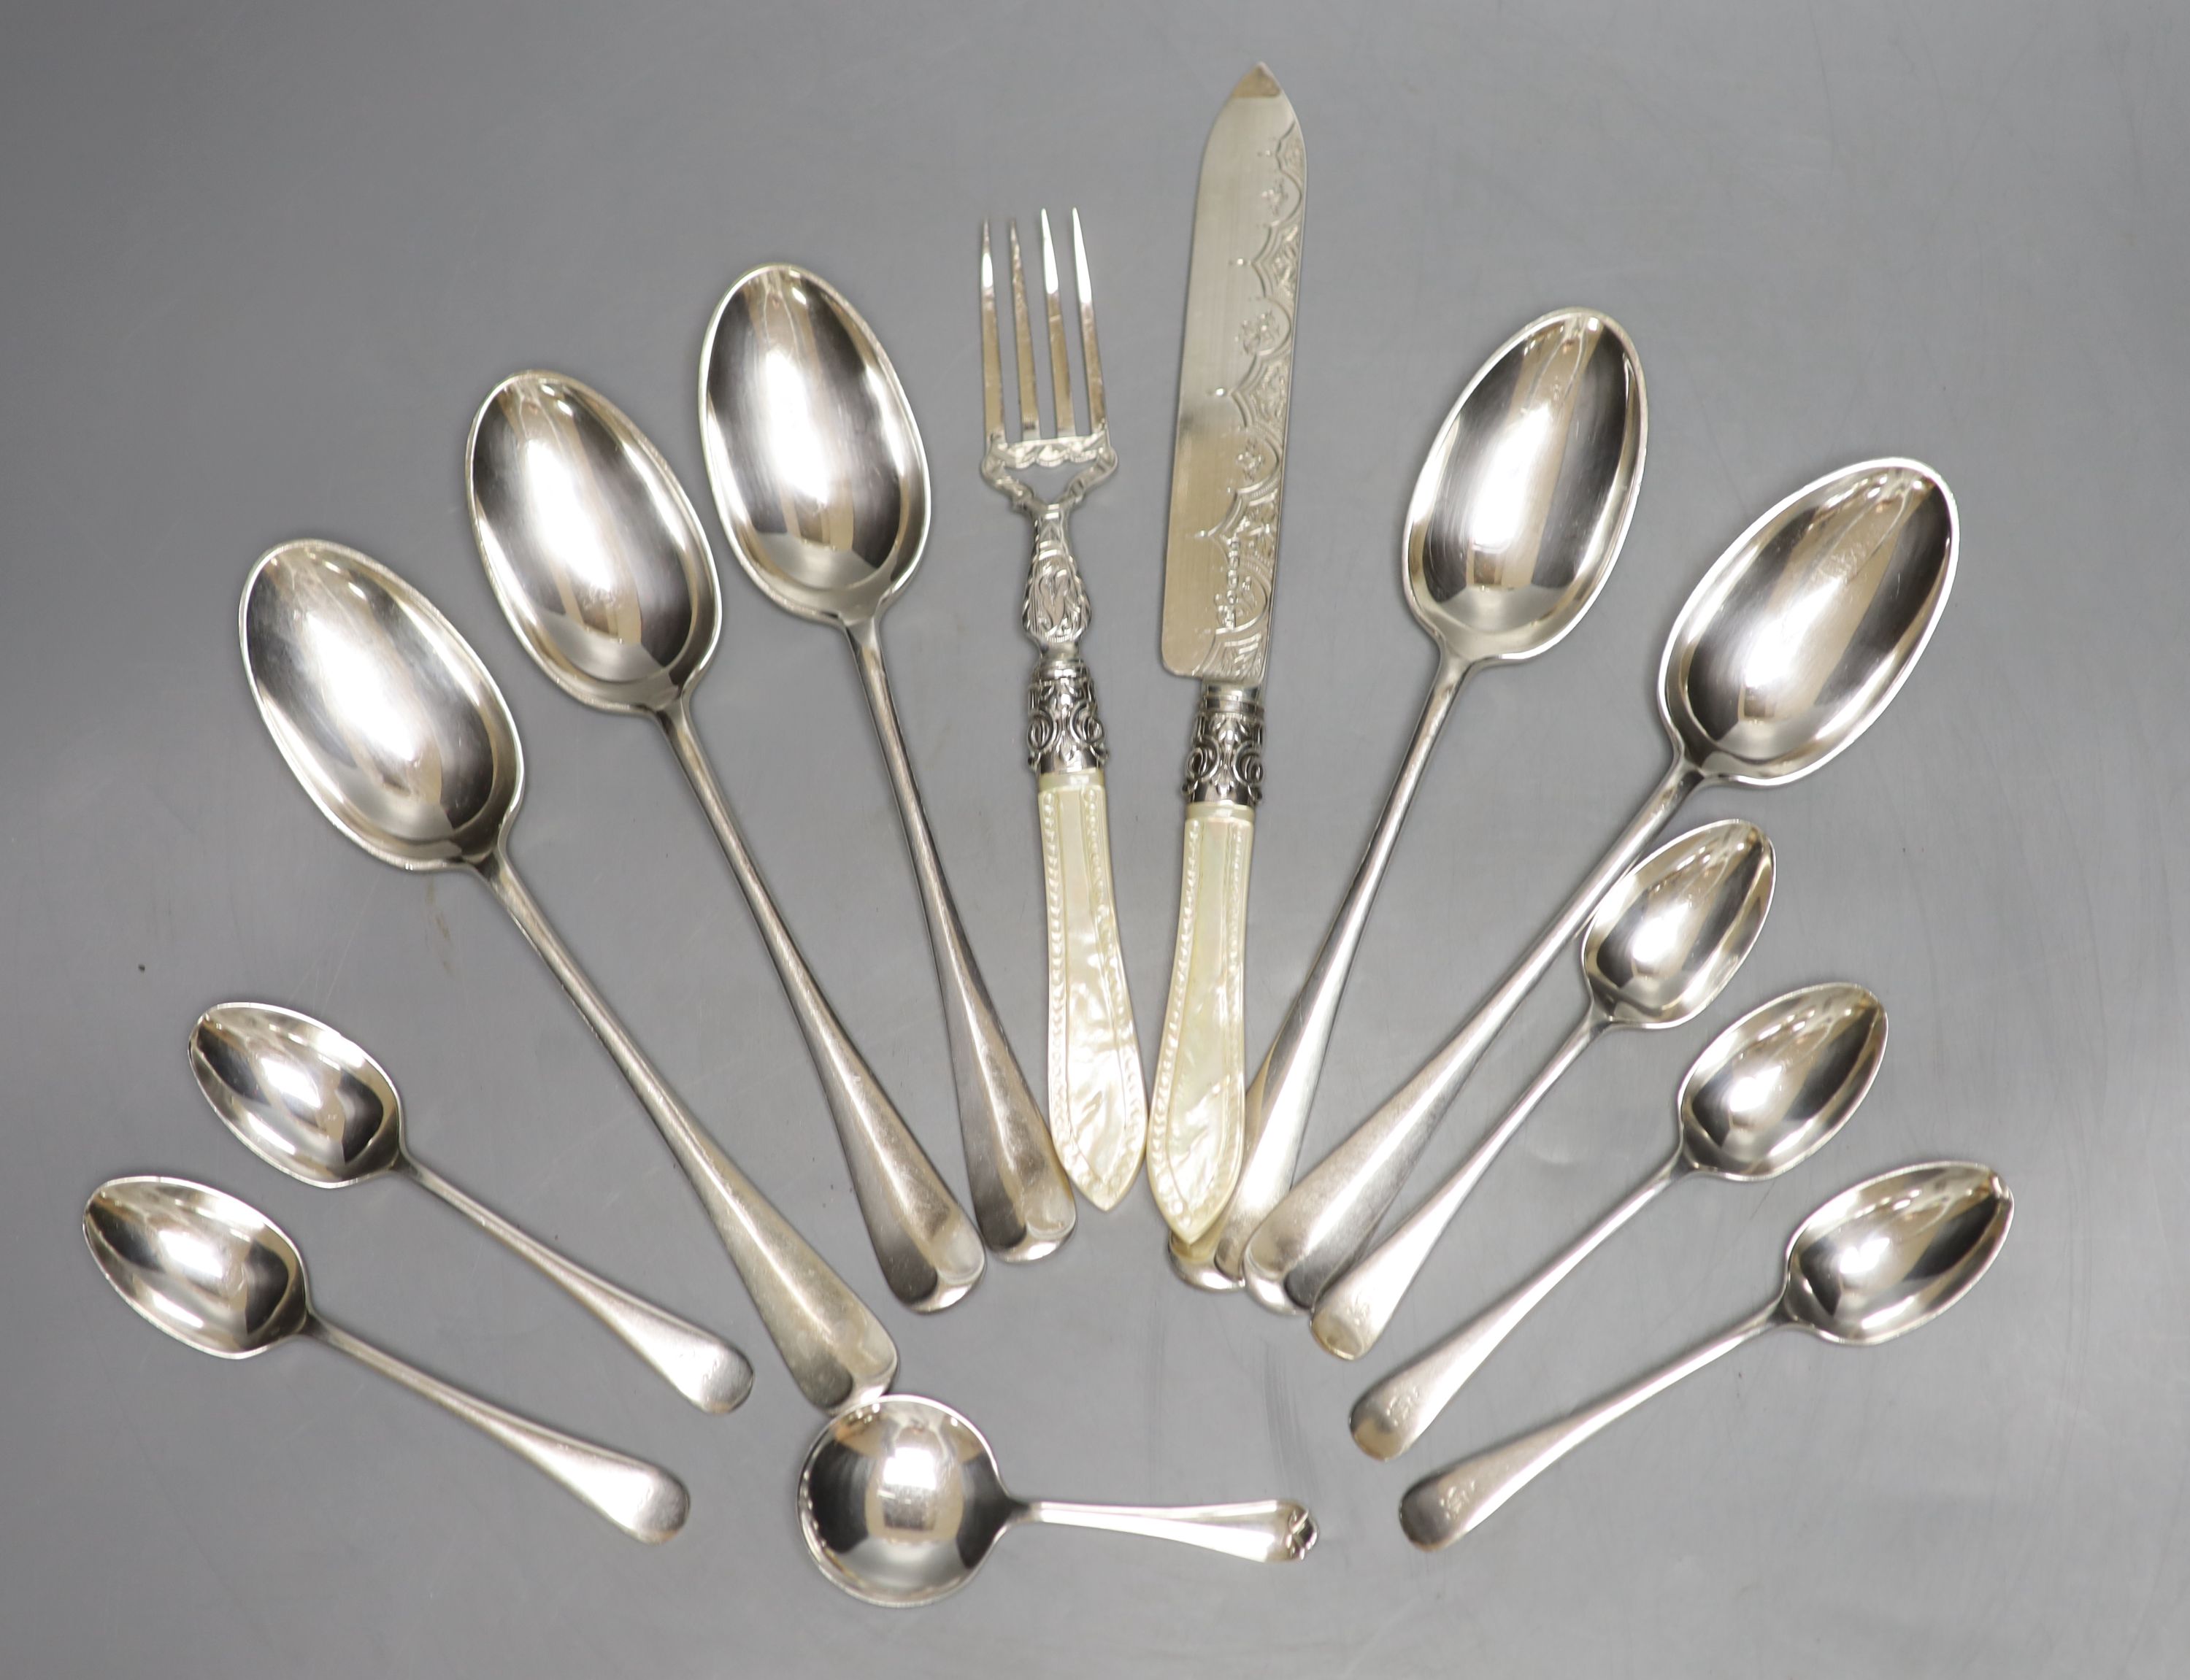 A Victorian mother of pearl handled silver knife and fork, George Unite, Birmingham, 1868, caddy spoon. etc.